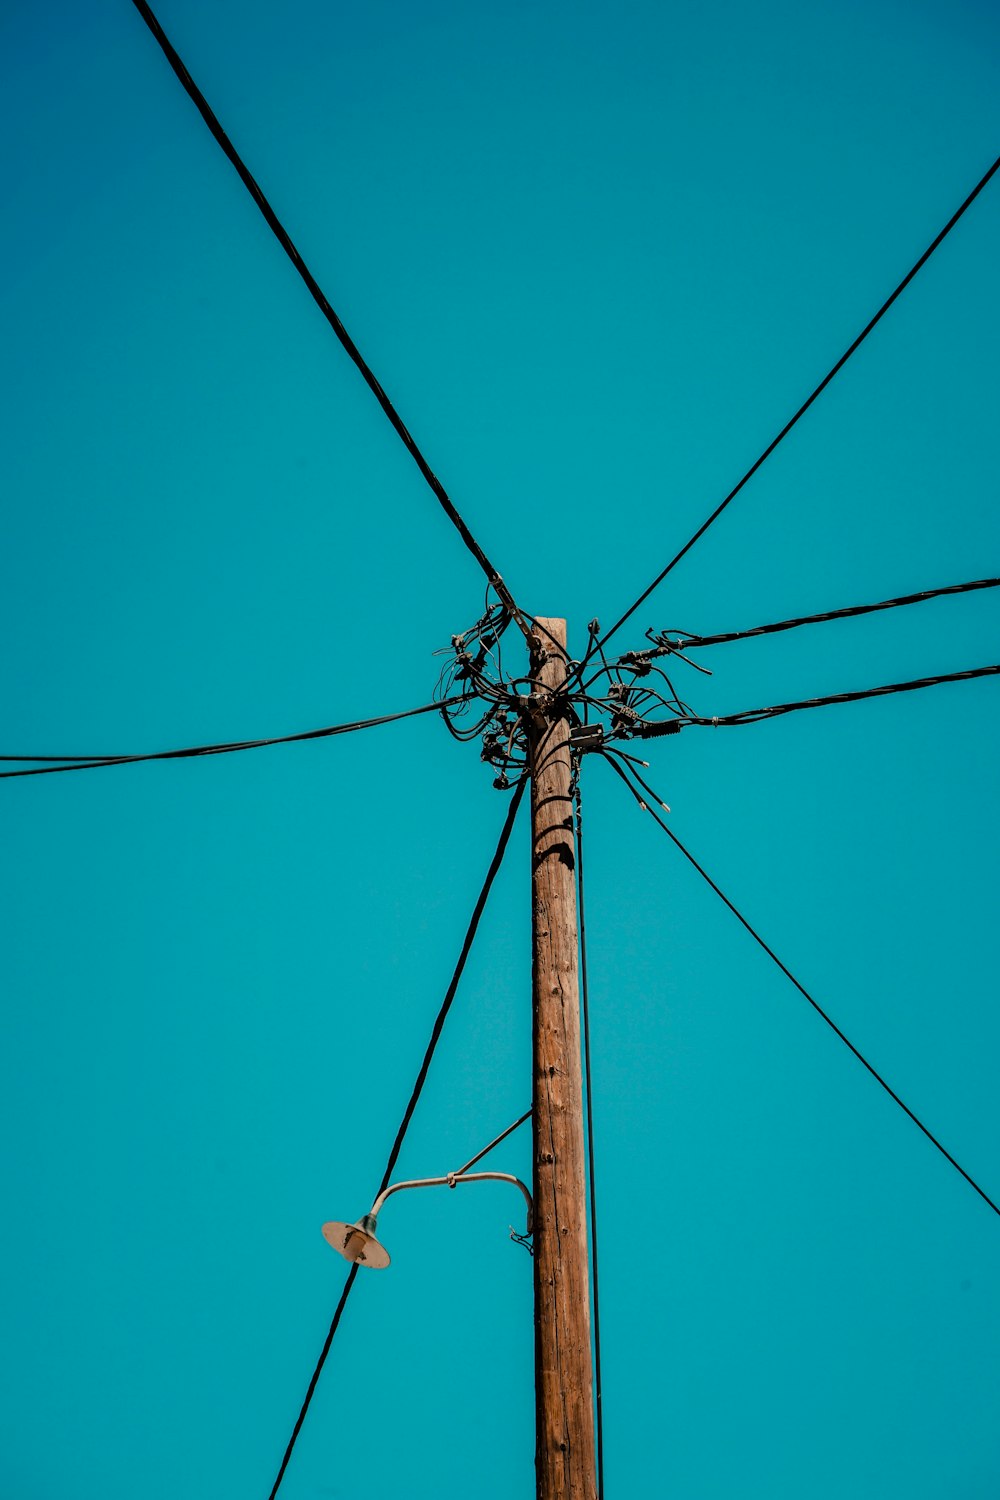 a telephone pole with wires